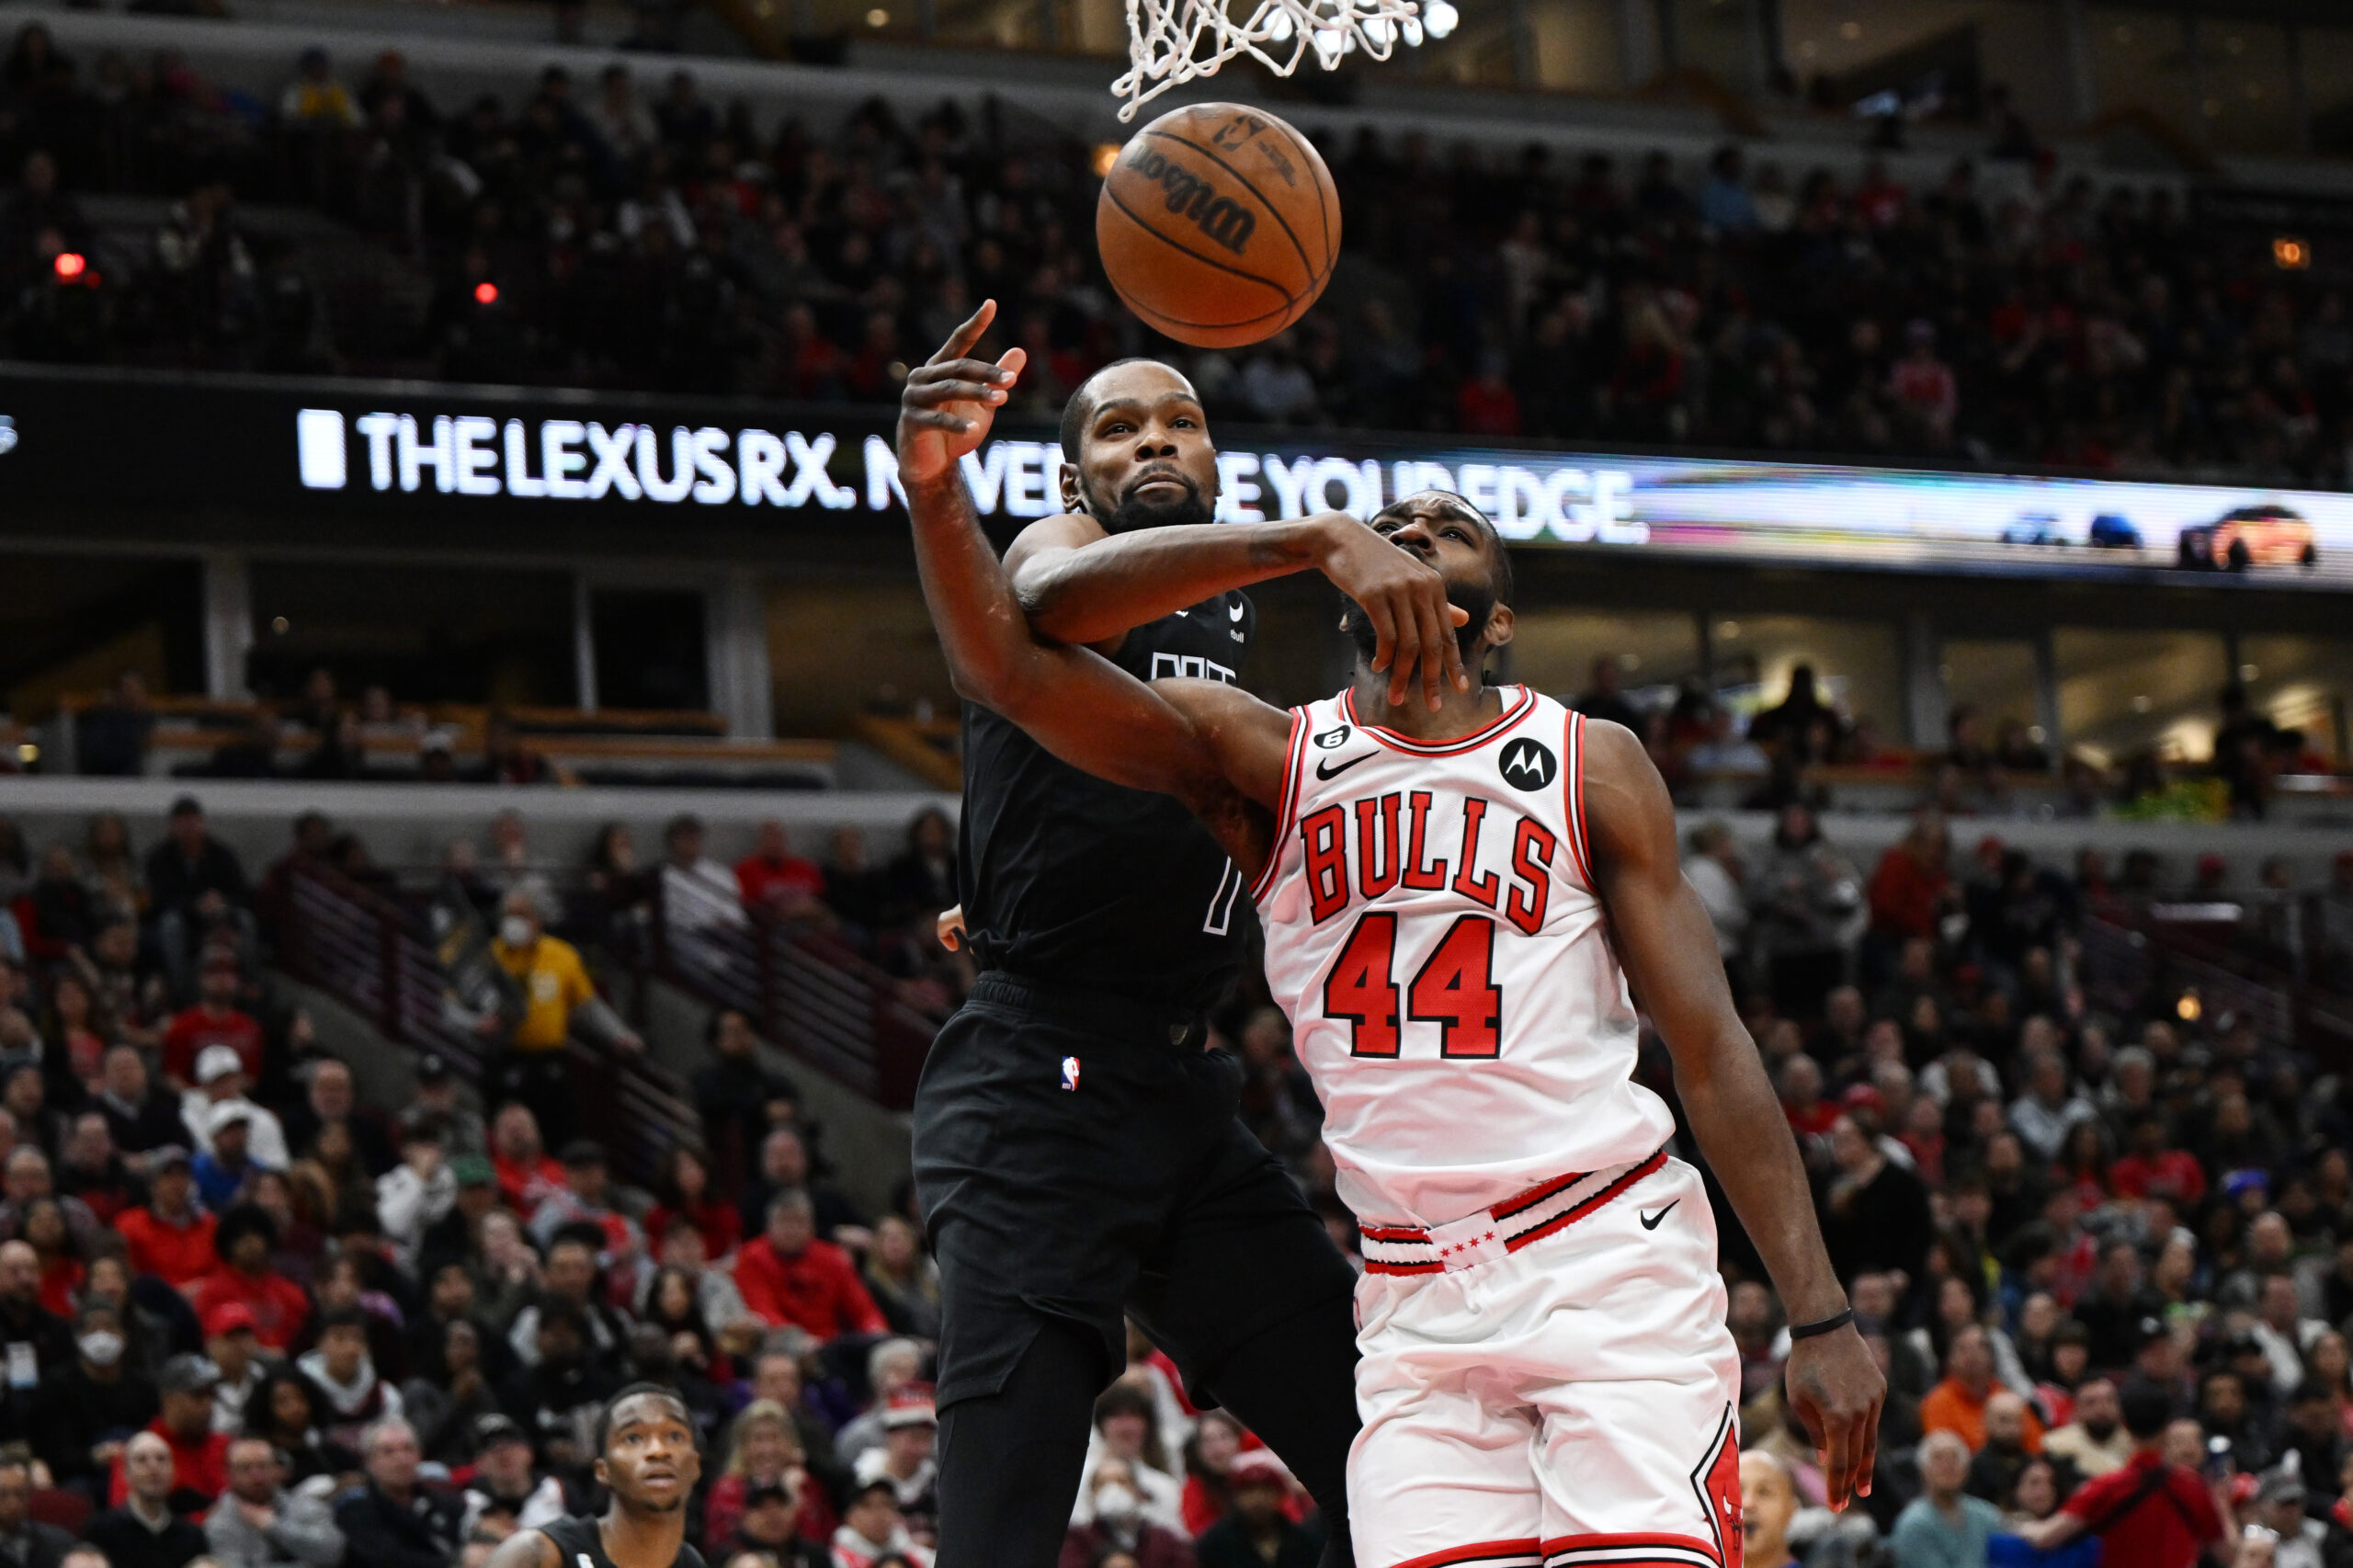 Player grades: Kevin Durant scores 44 as Nets lose to the Bulls 121-112